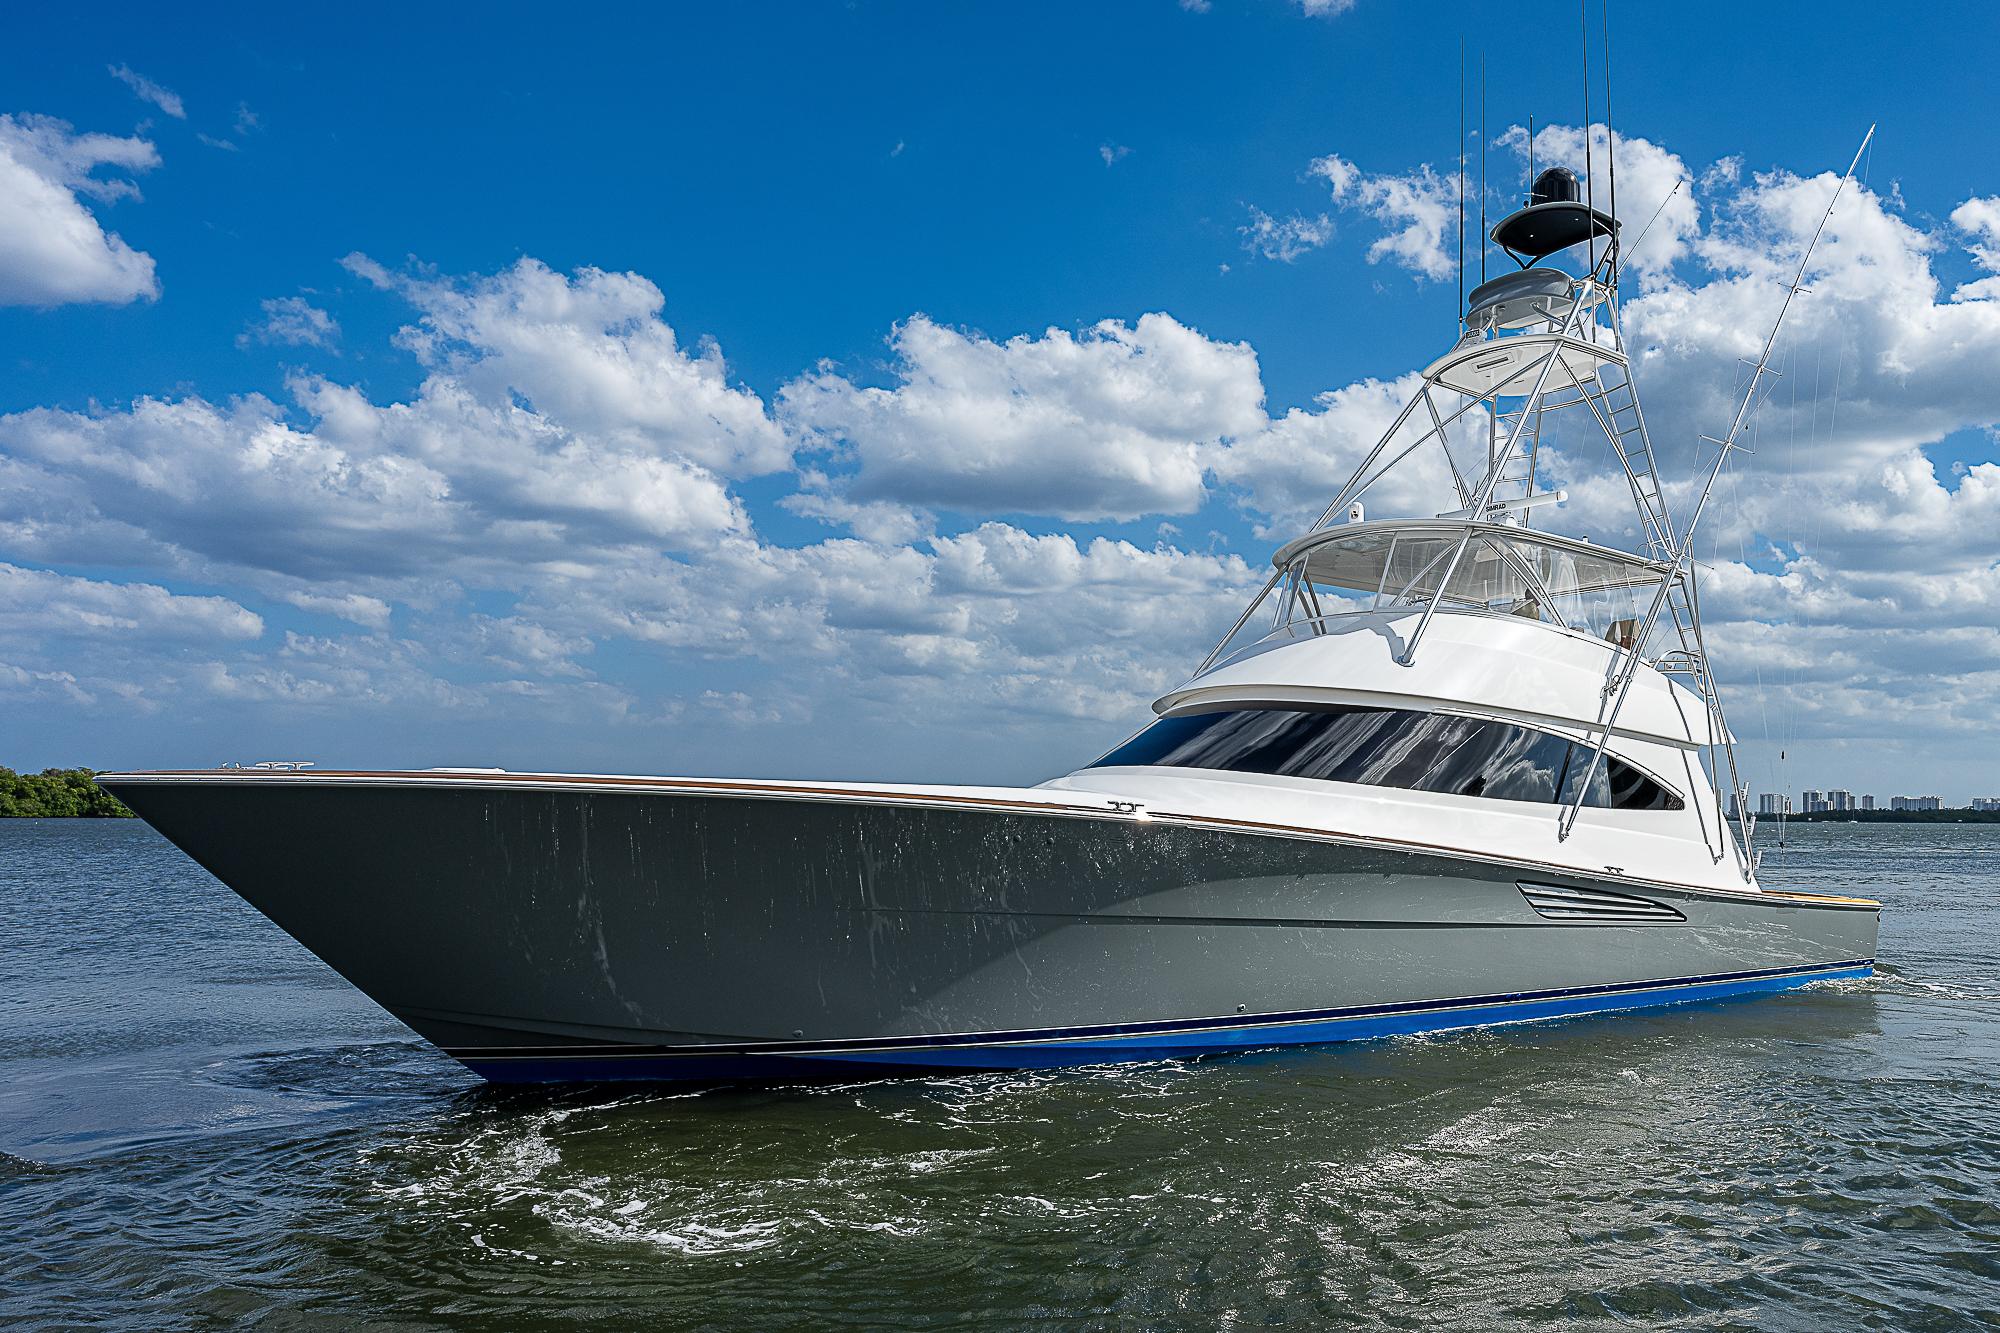 City Hands Yacht for Sale  68 Viking Yachts North Palm Beach, FL